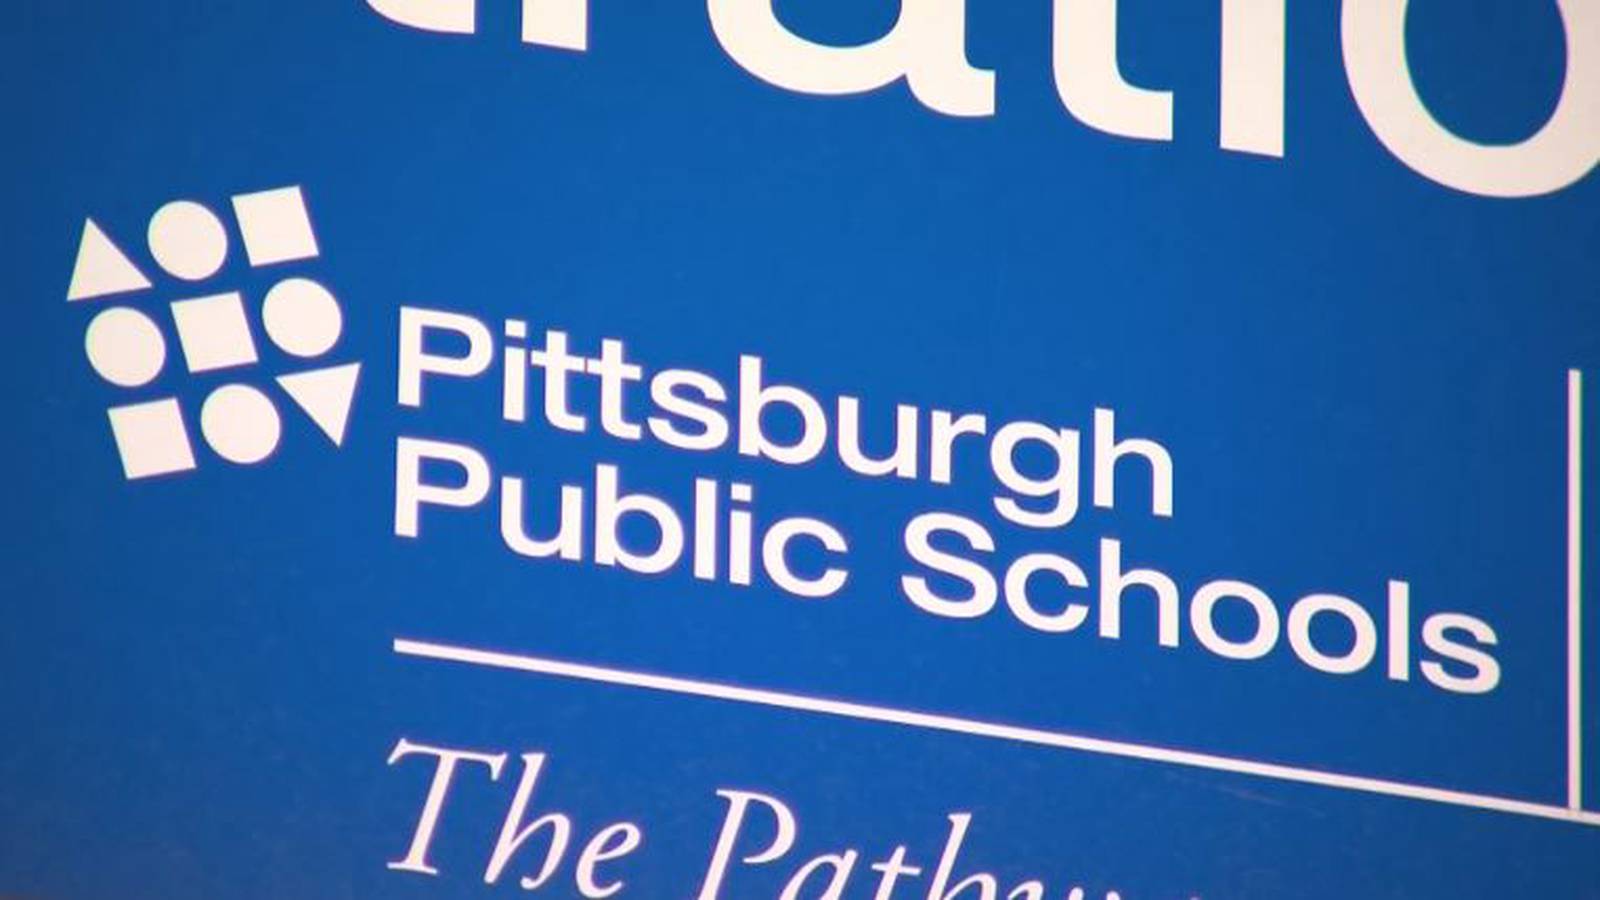 3 Pittsburgh Public Schools on modified lockdown after alleged social